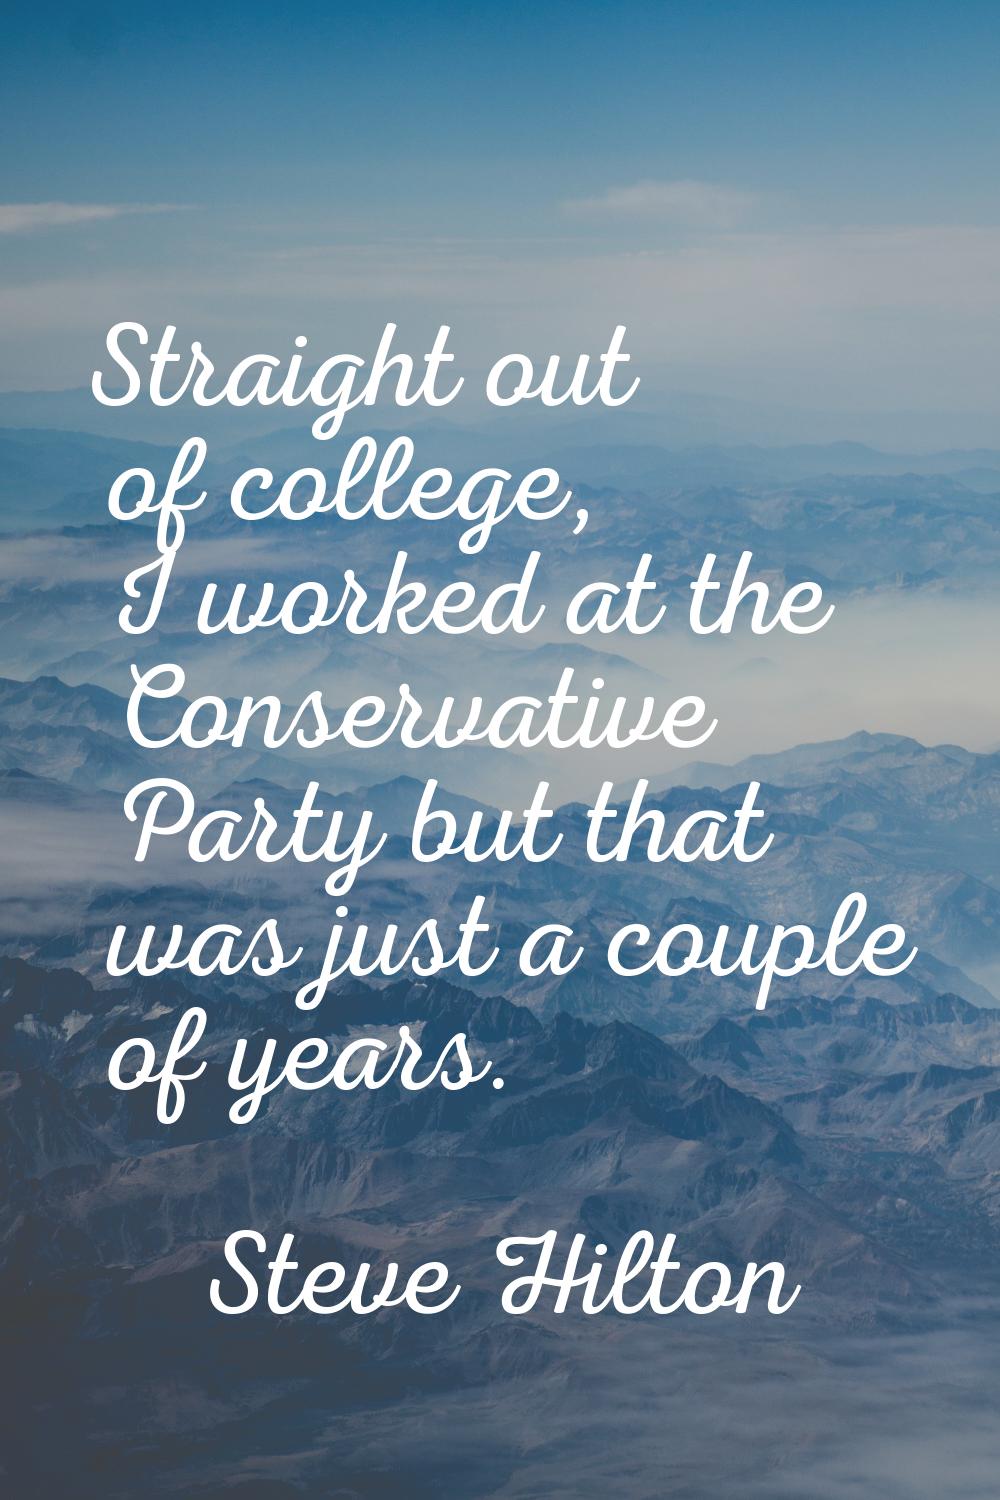 Straight out of college, I worked at the Conservative Party but that was just a couple of years.